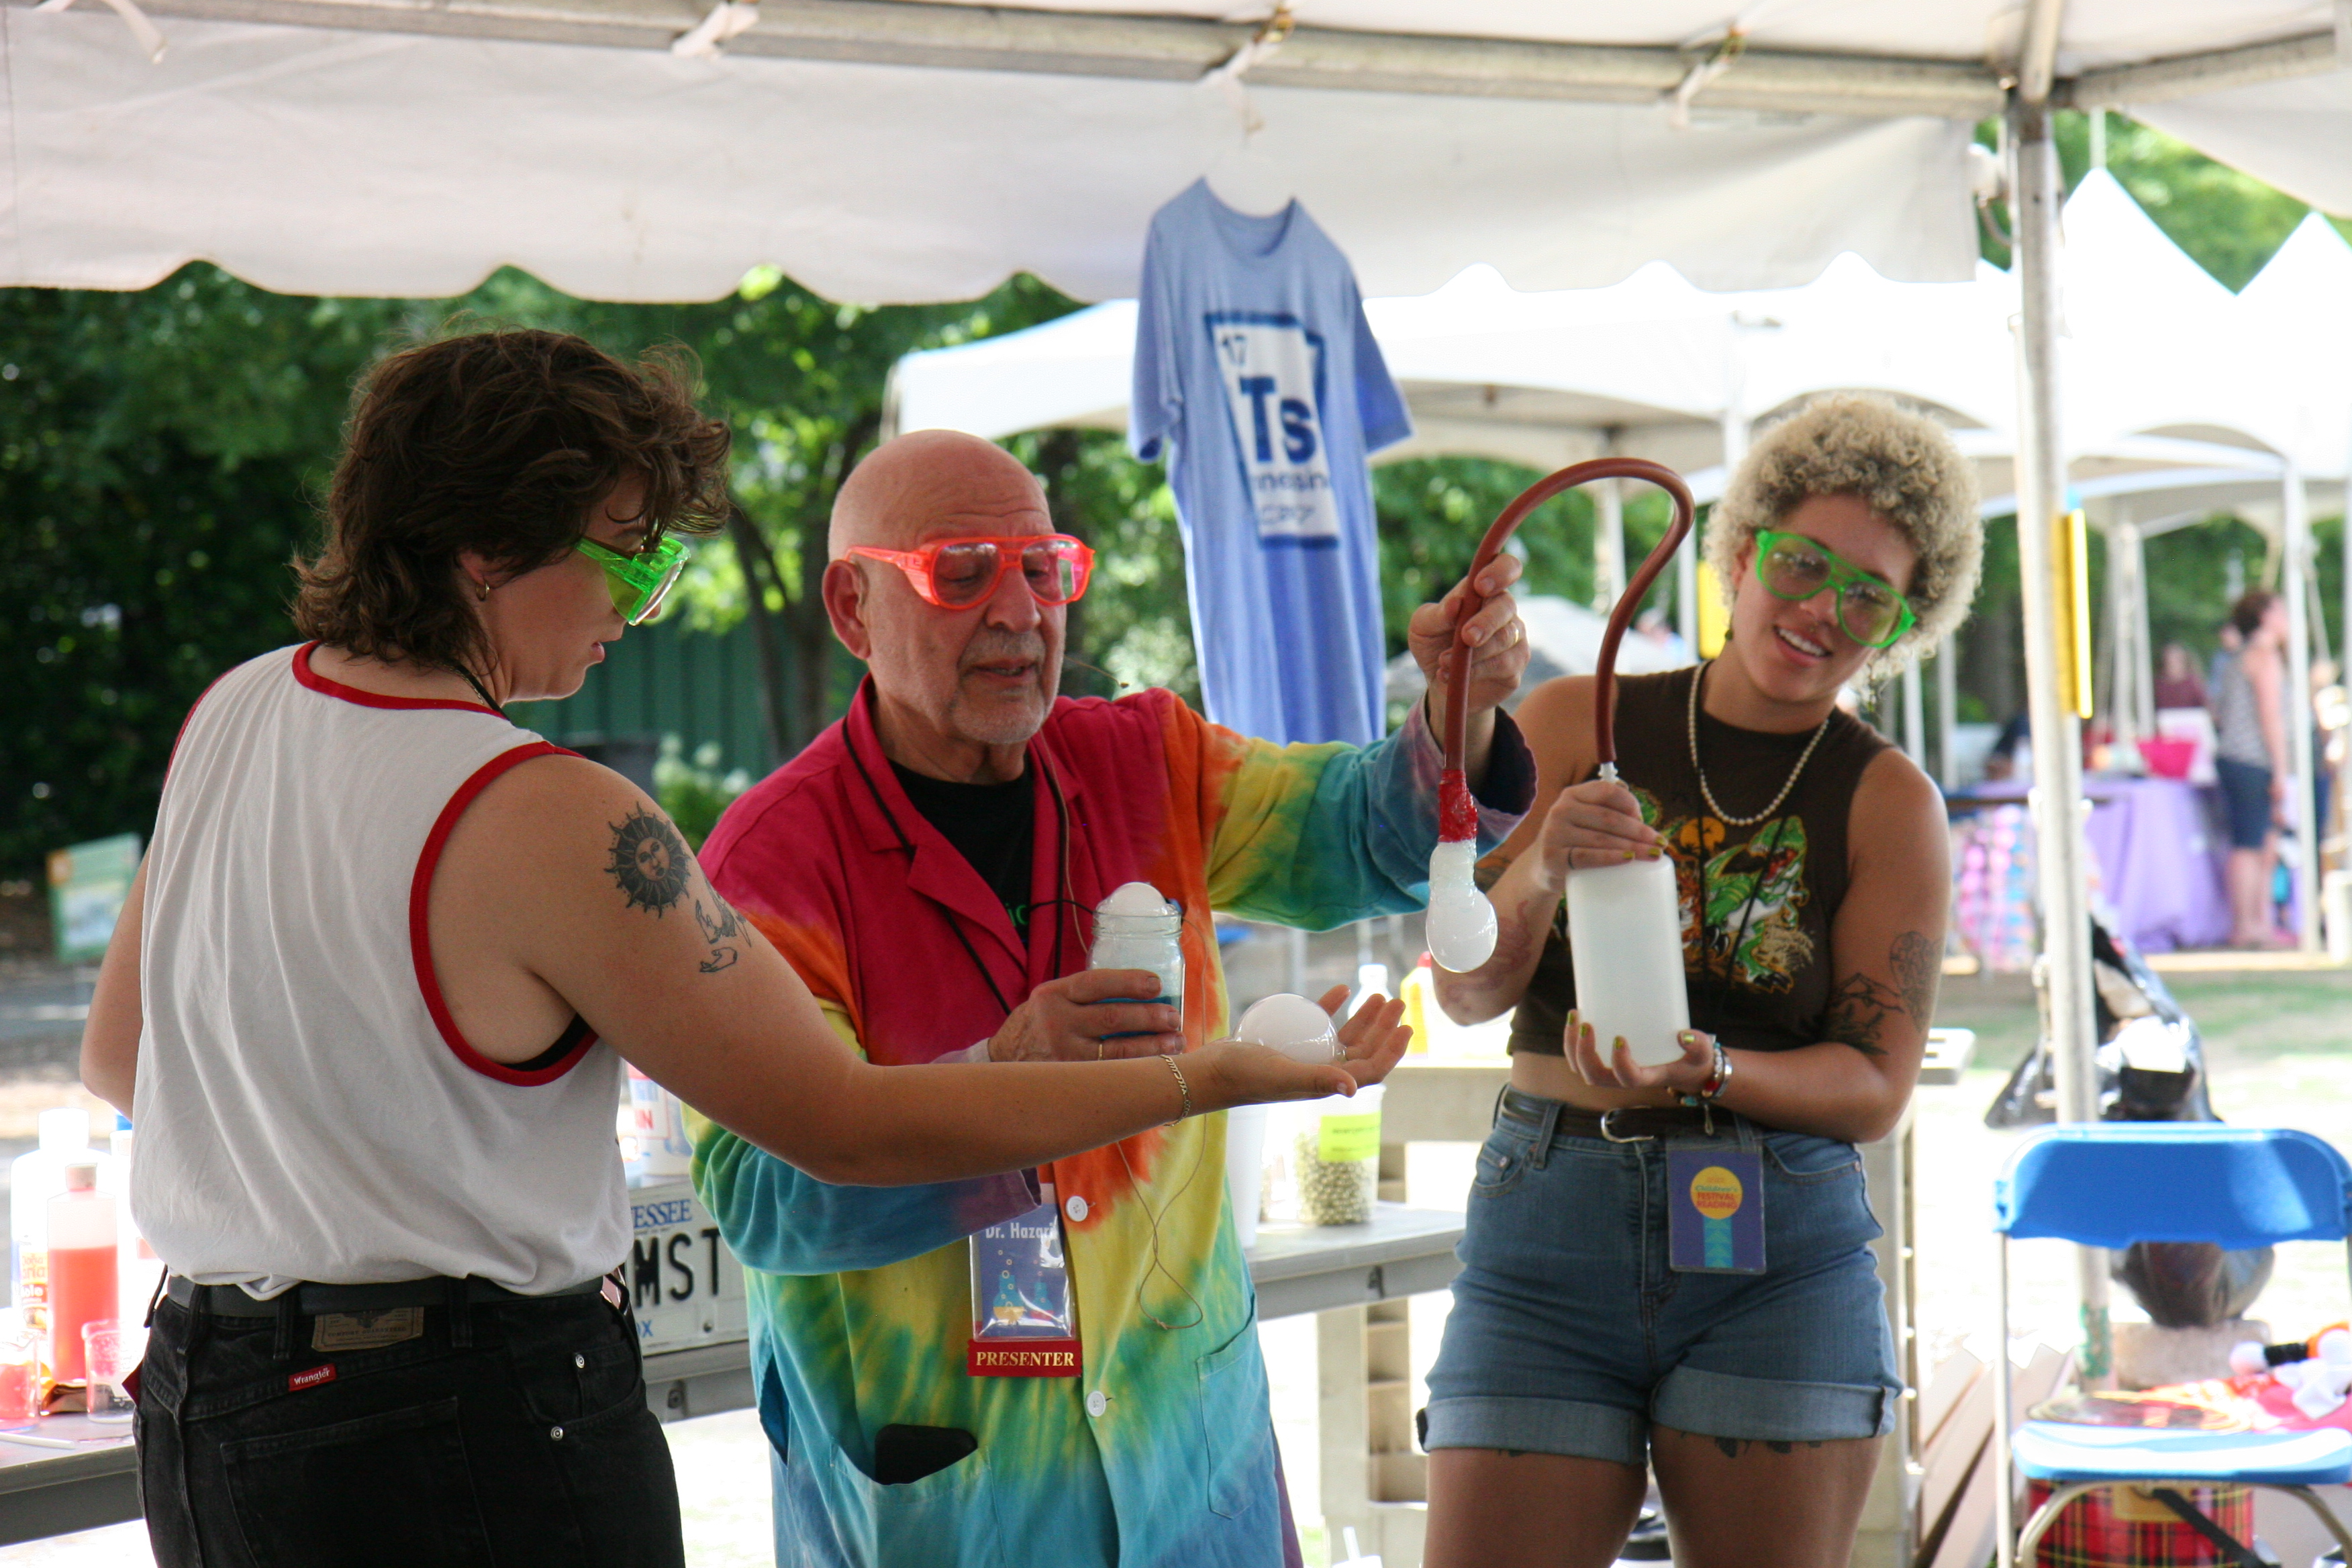 A presenter in a tie-dye lab coat with two assistants for a science experiment